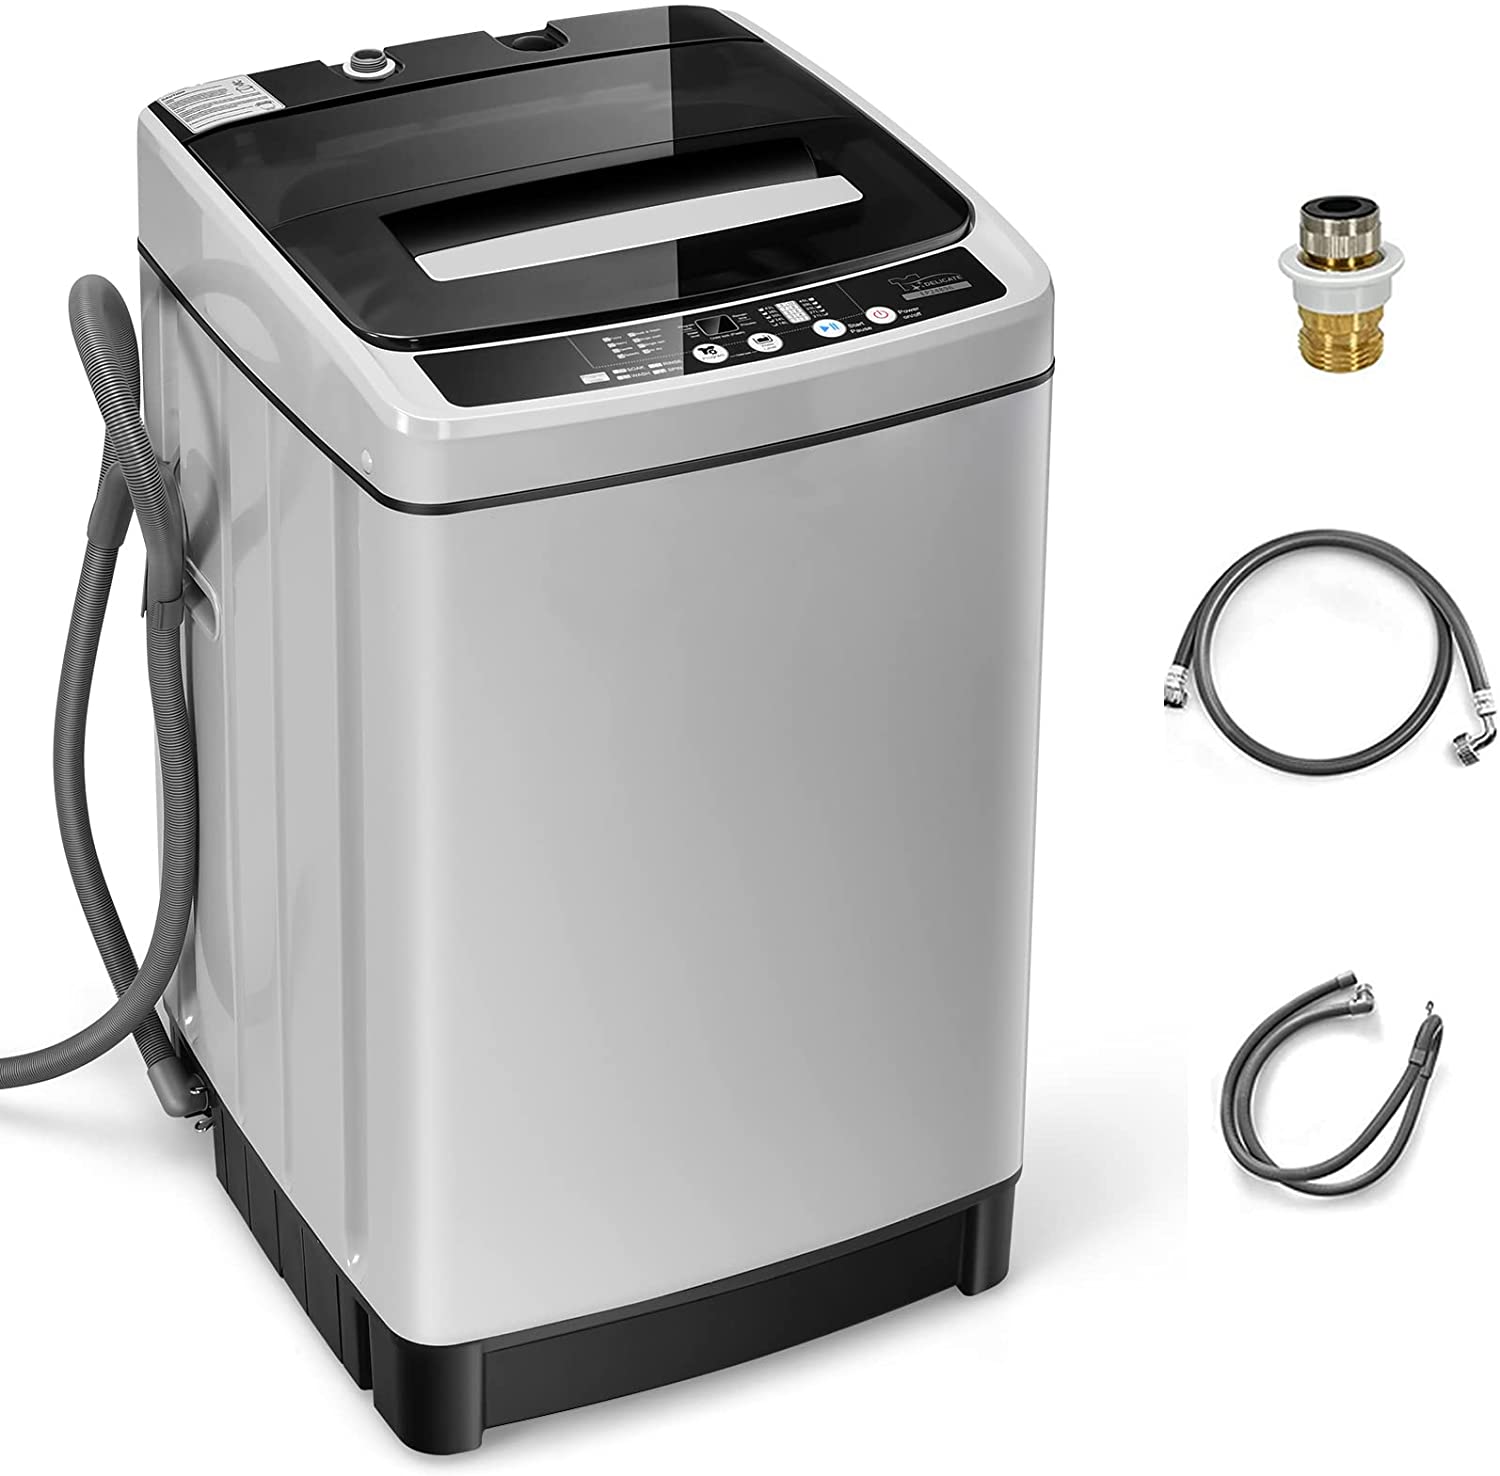 Giantex High-Efficiency Child-Safe Top Load Washer, 1.5-Cubic Feet